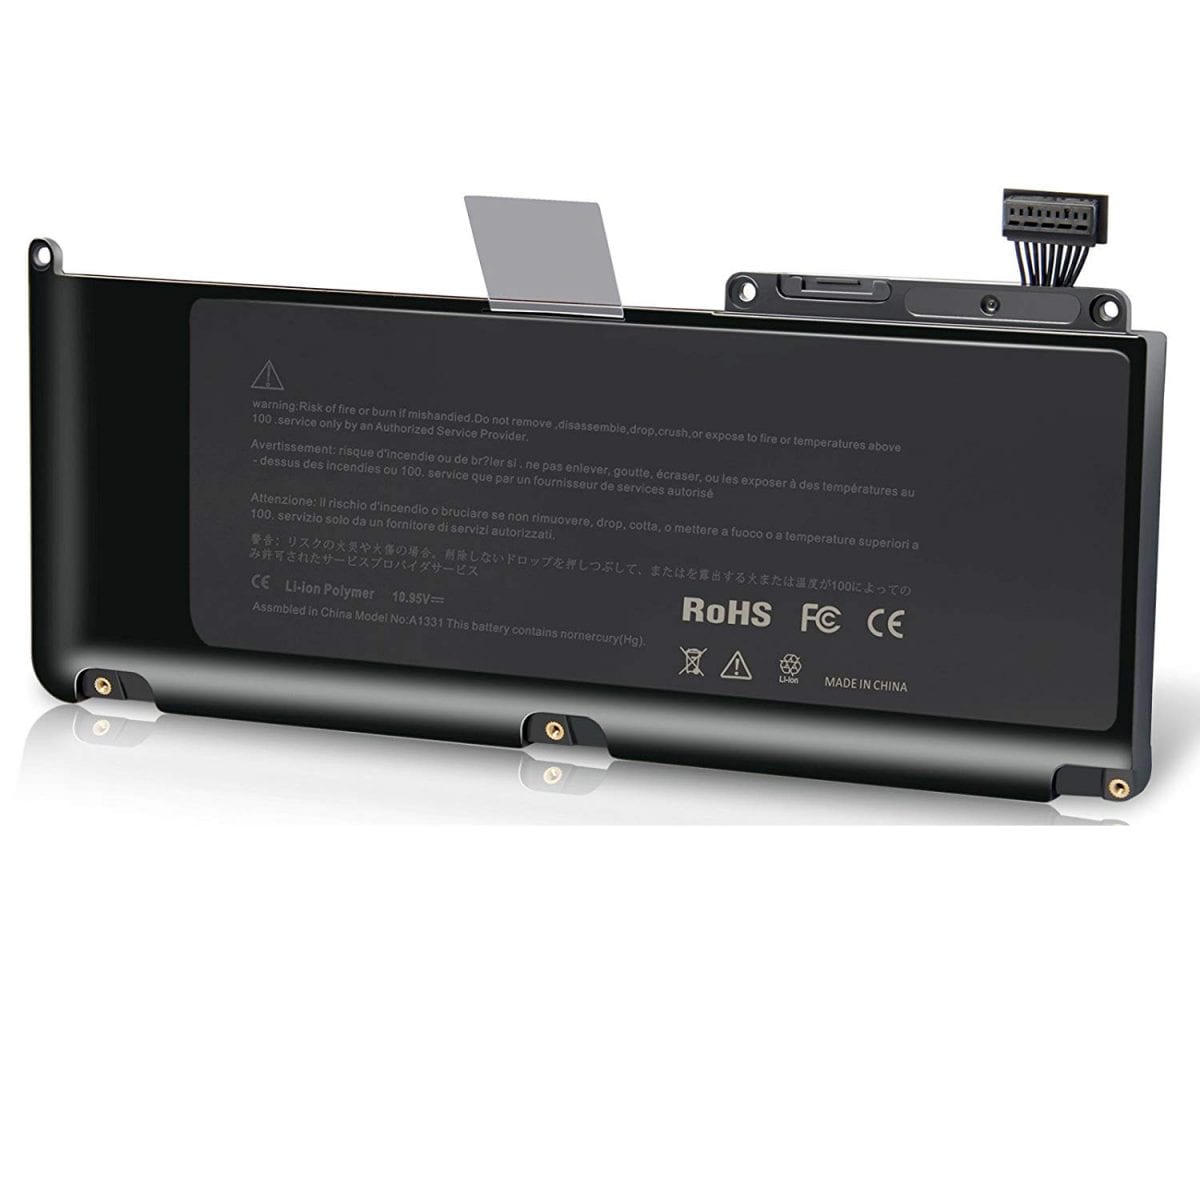 Laptop Battery for Apple A1331 A1342 Macbook Pro 15 and 17  020-6810-A, 020-6580-A